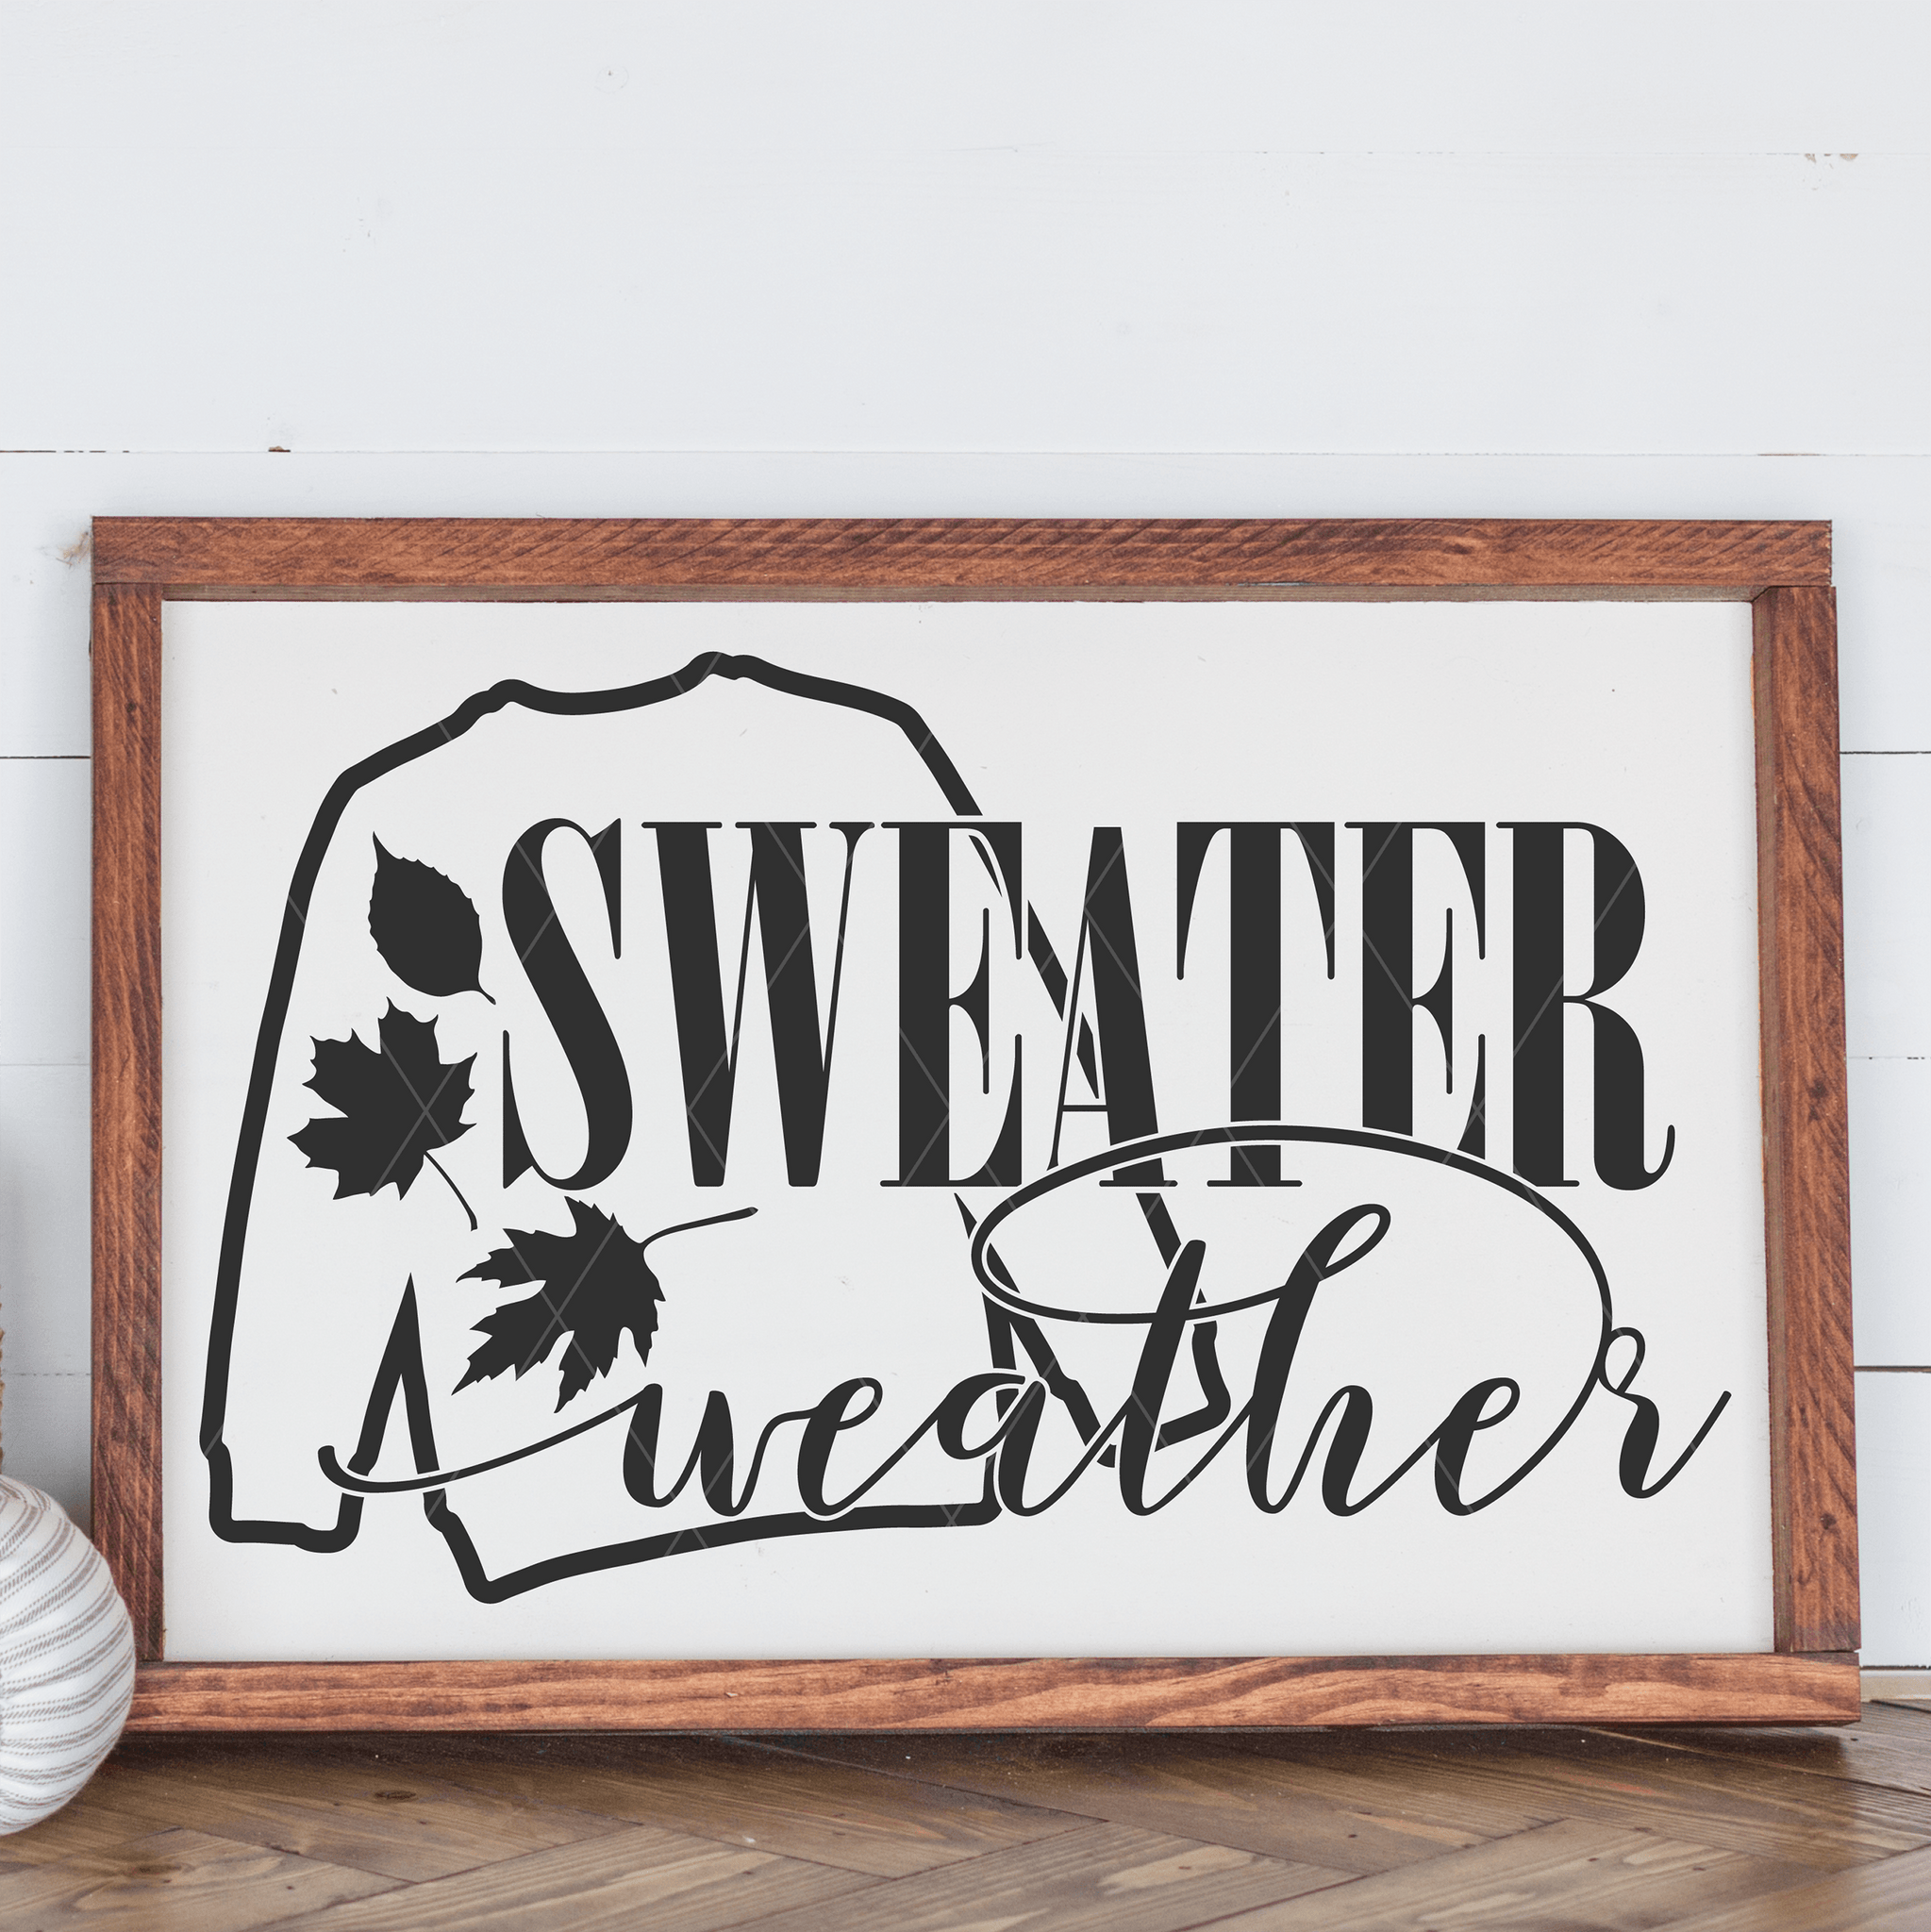 Sweater Weather SVG File for Fall/Autumn - Commercial Use SVG Files for Cricut & Silhouette